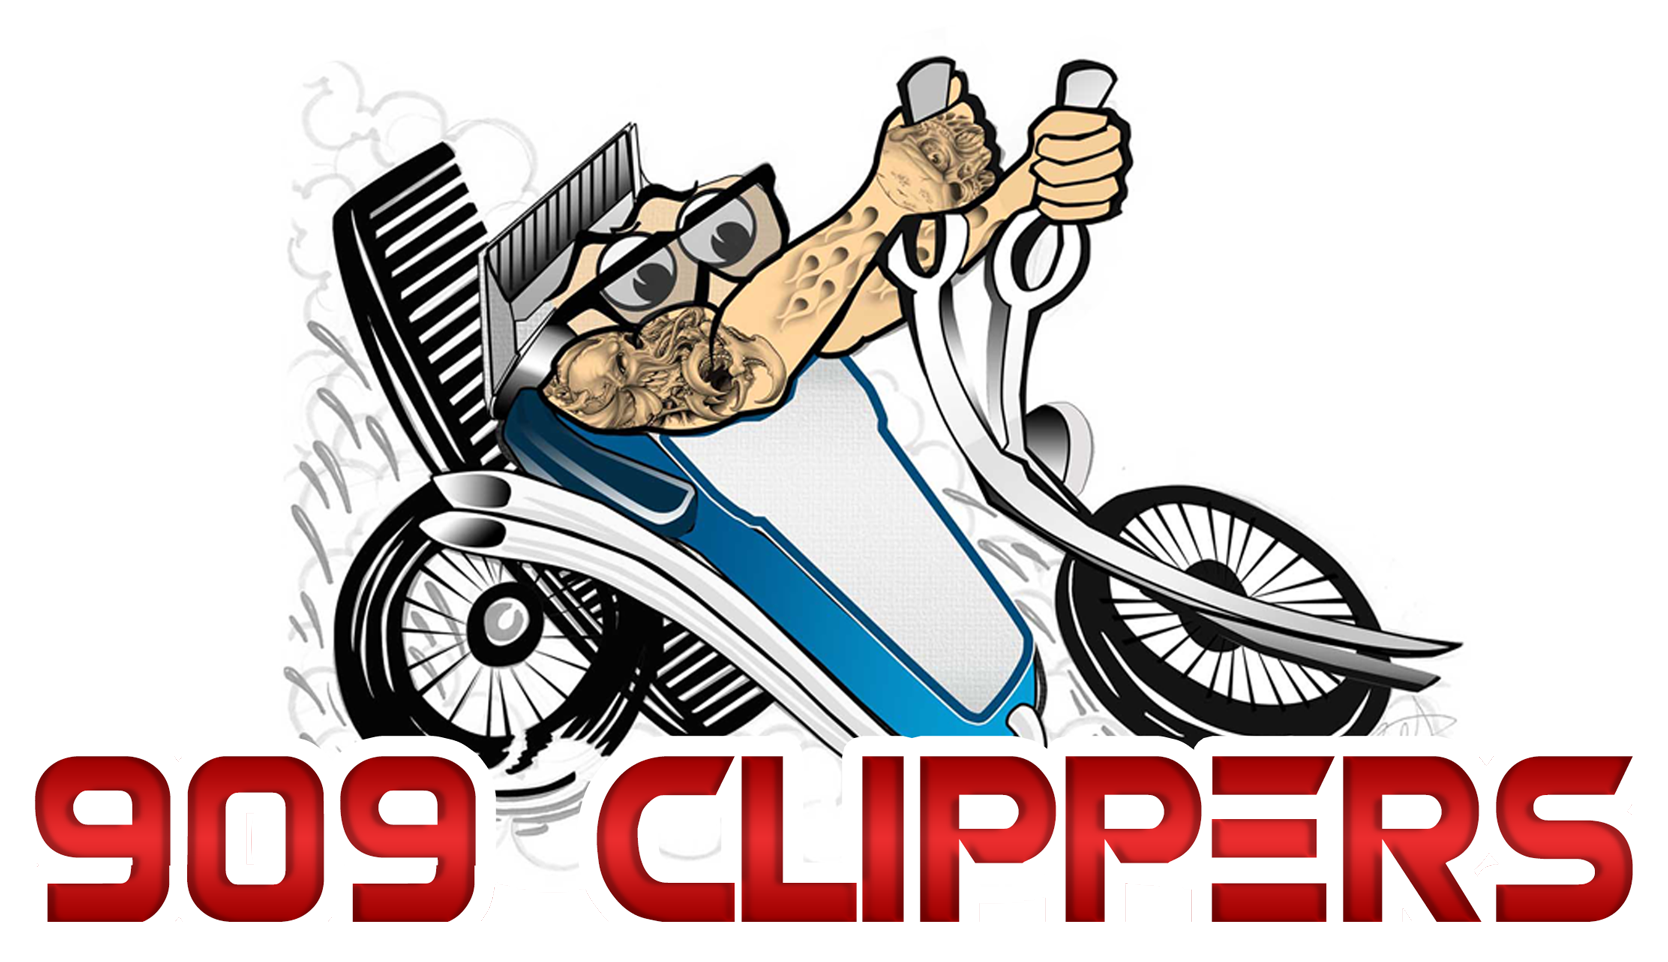 909 Clippers – Best cuts in town!